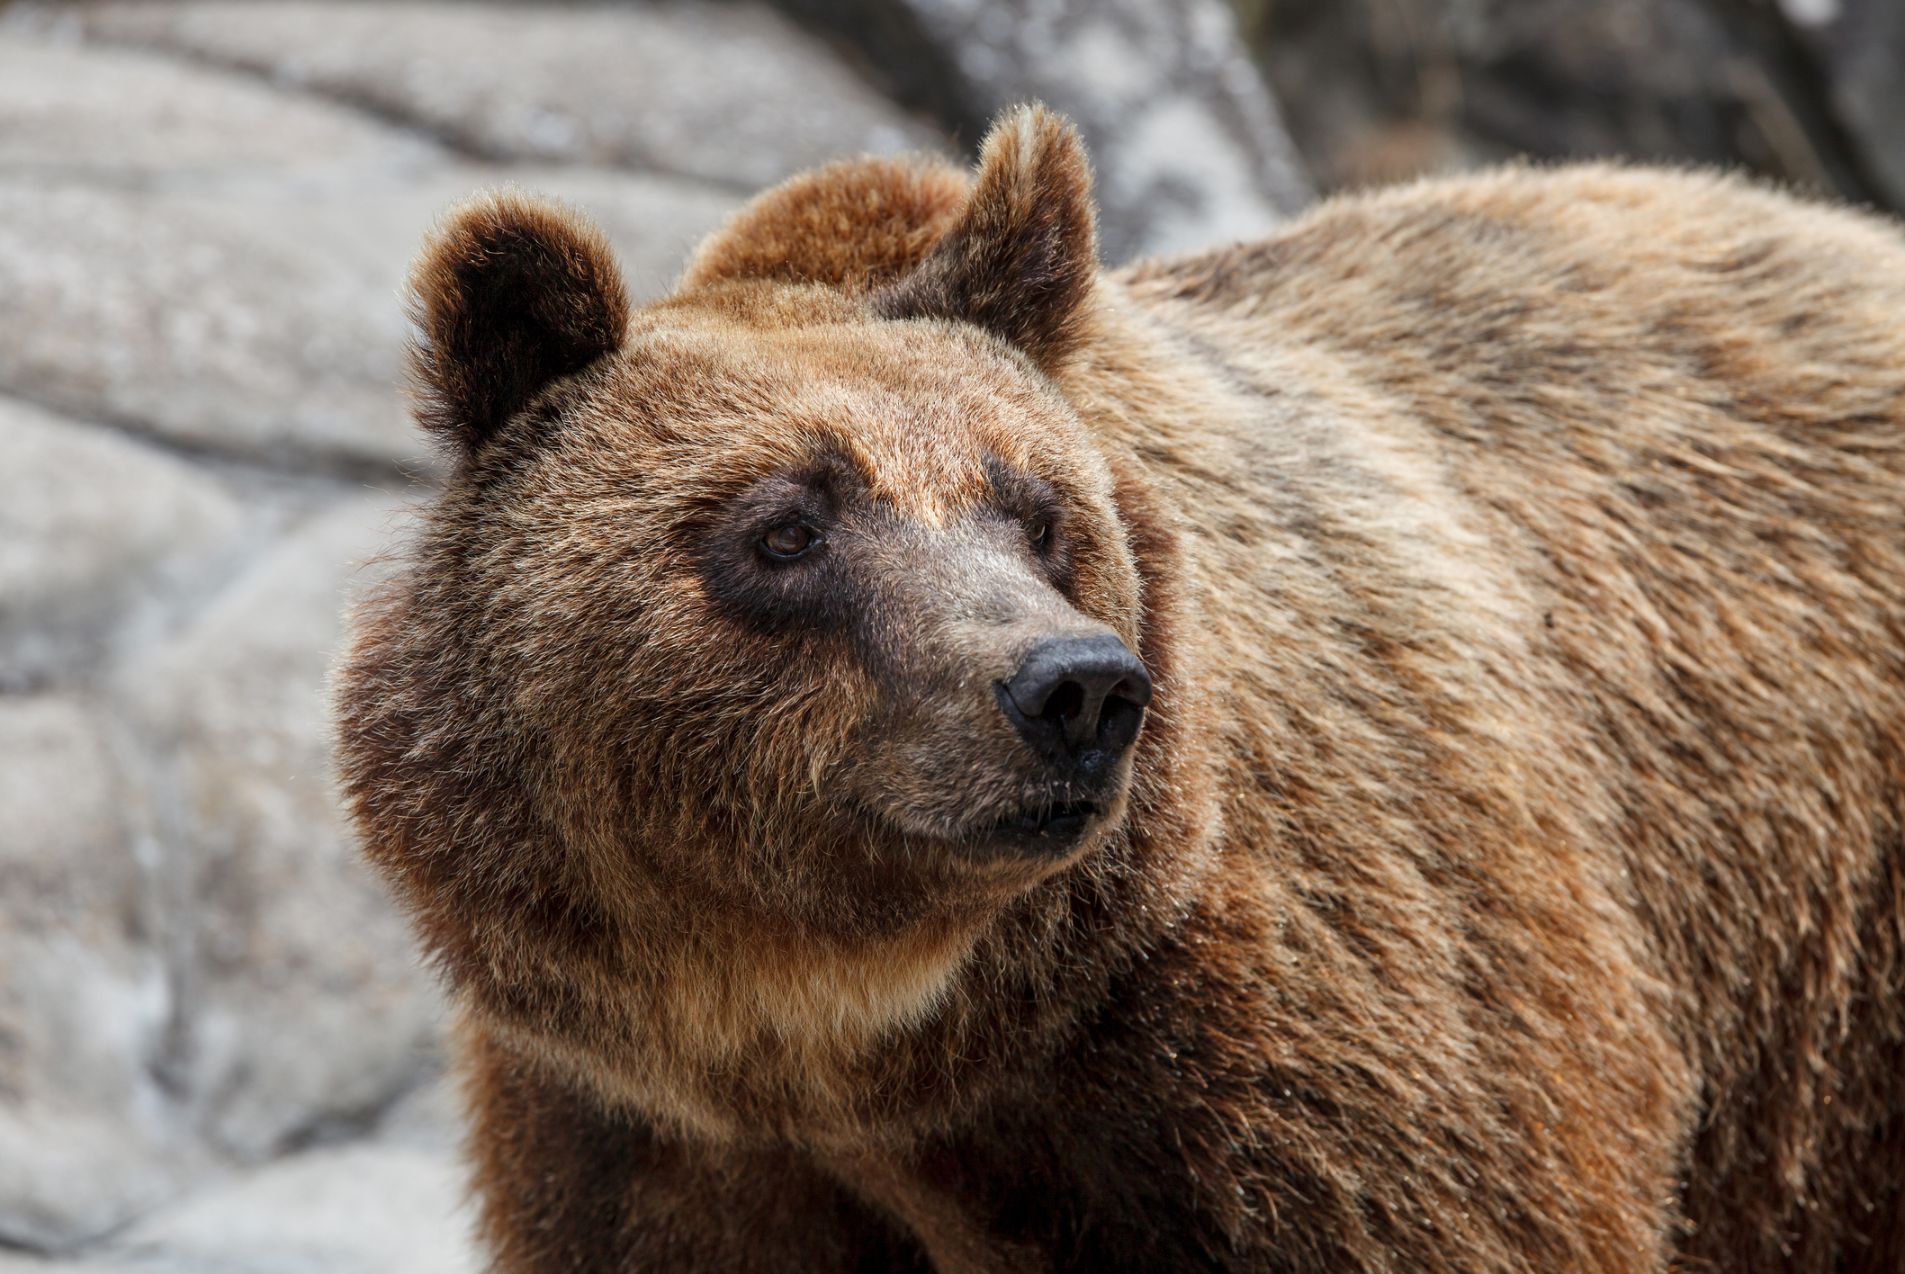 A brown bear in the Pindos mountains of Greece. There are around 500 bears in the area.